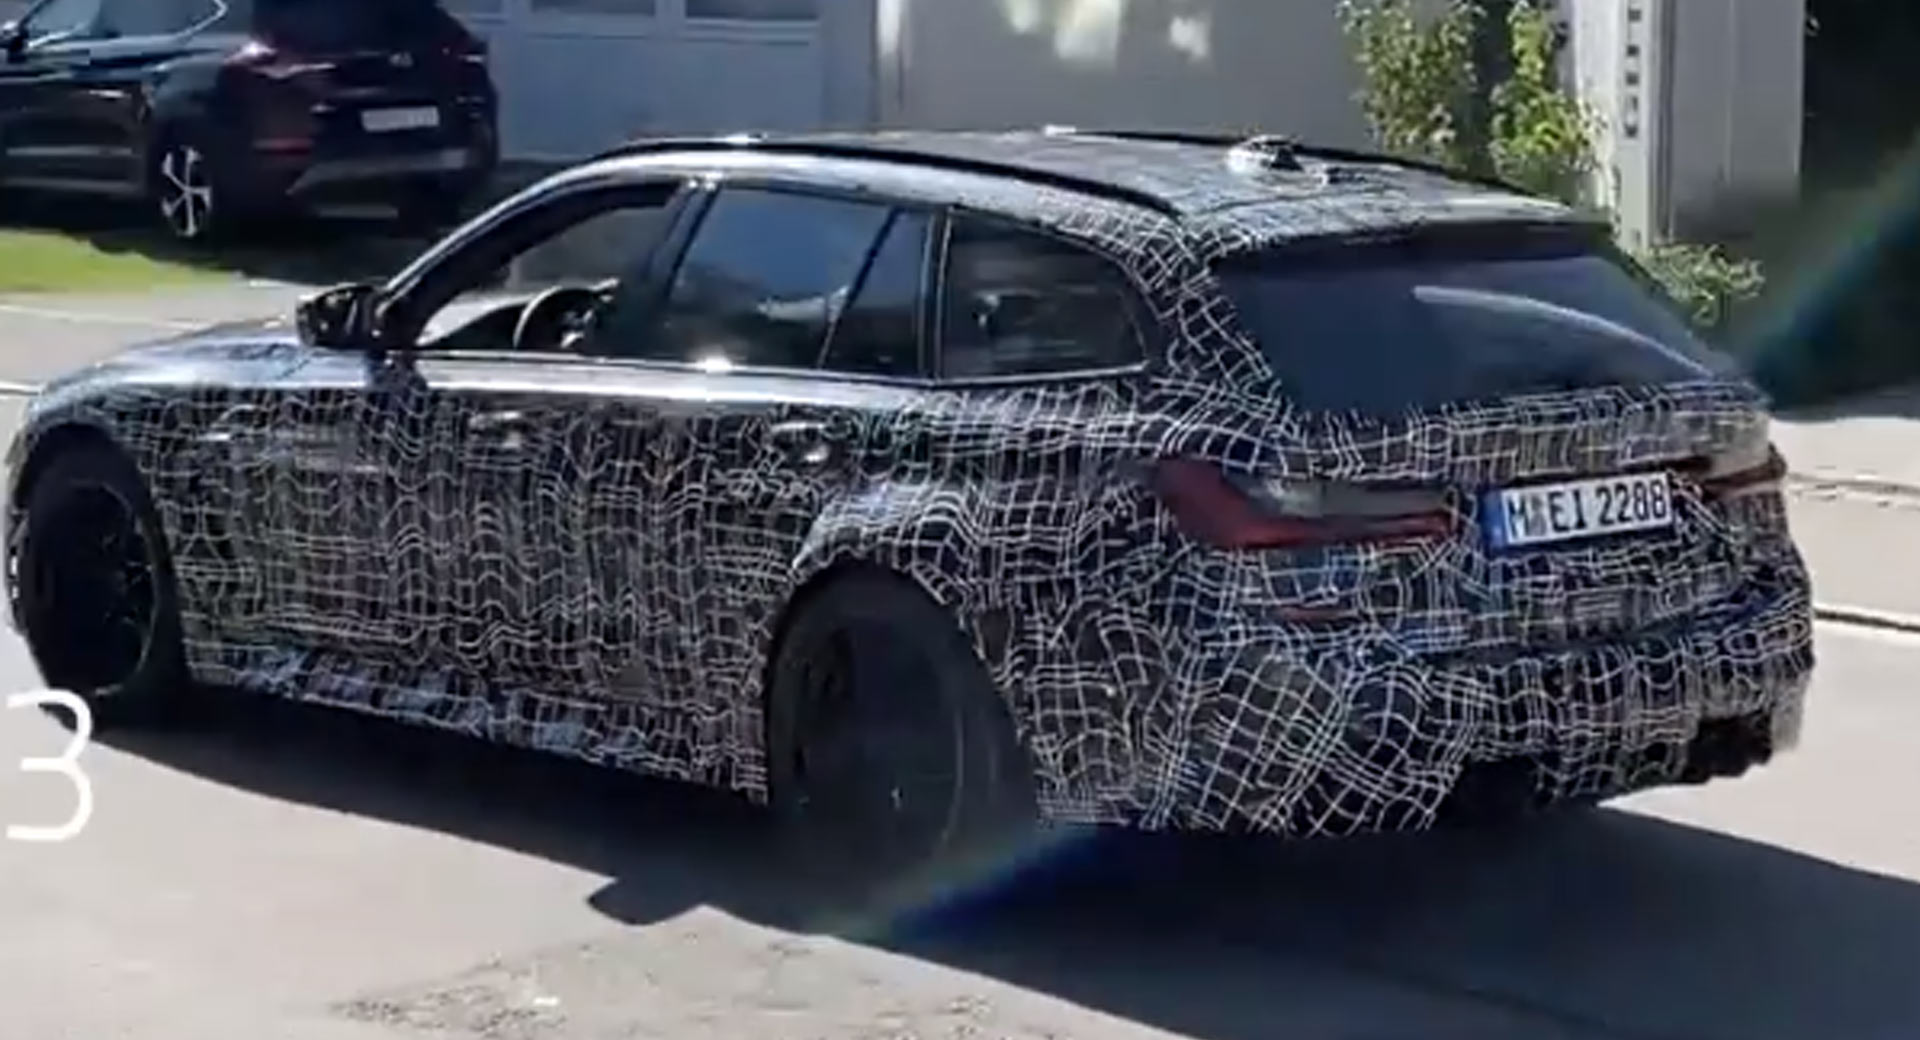 2022 Bmw M3 Touring Hits The Street Super Wagon Could Pack Up To 503 Hp Usa News Hub